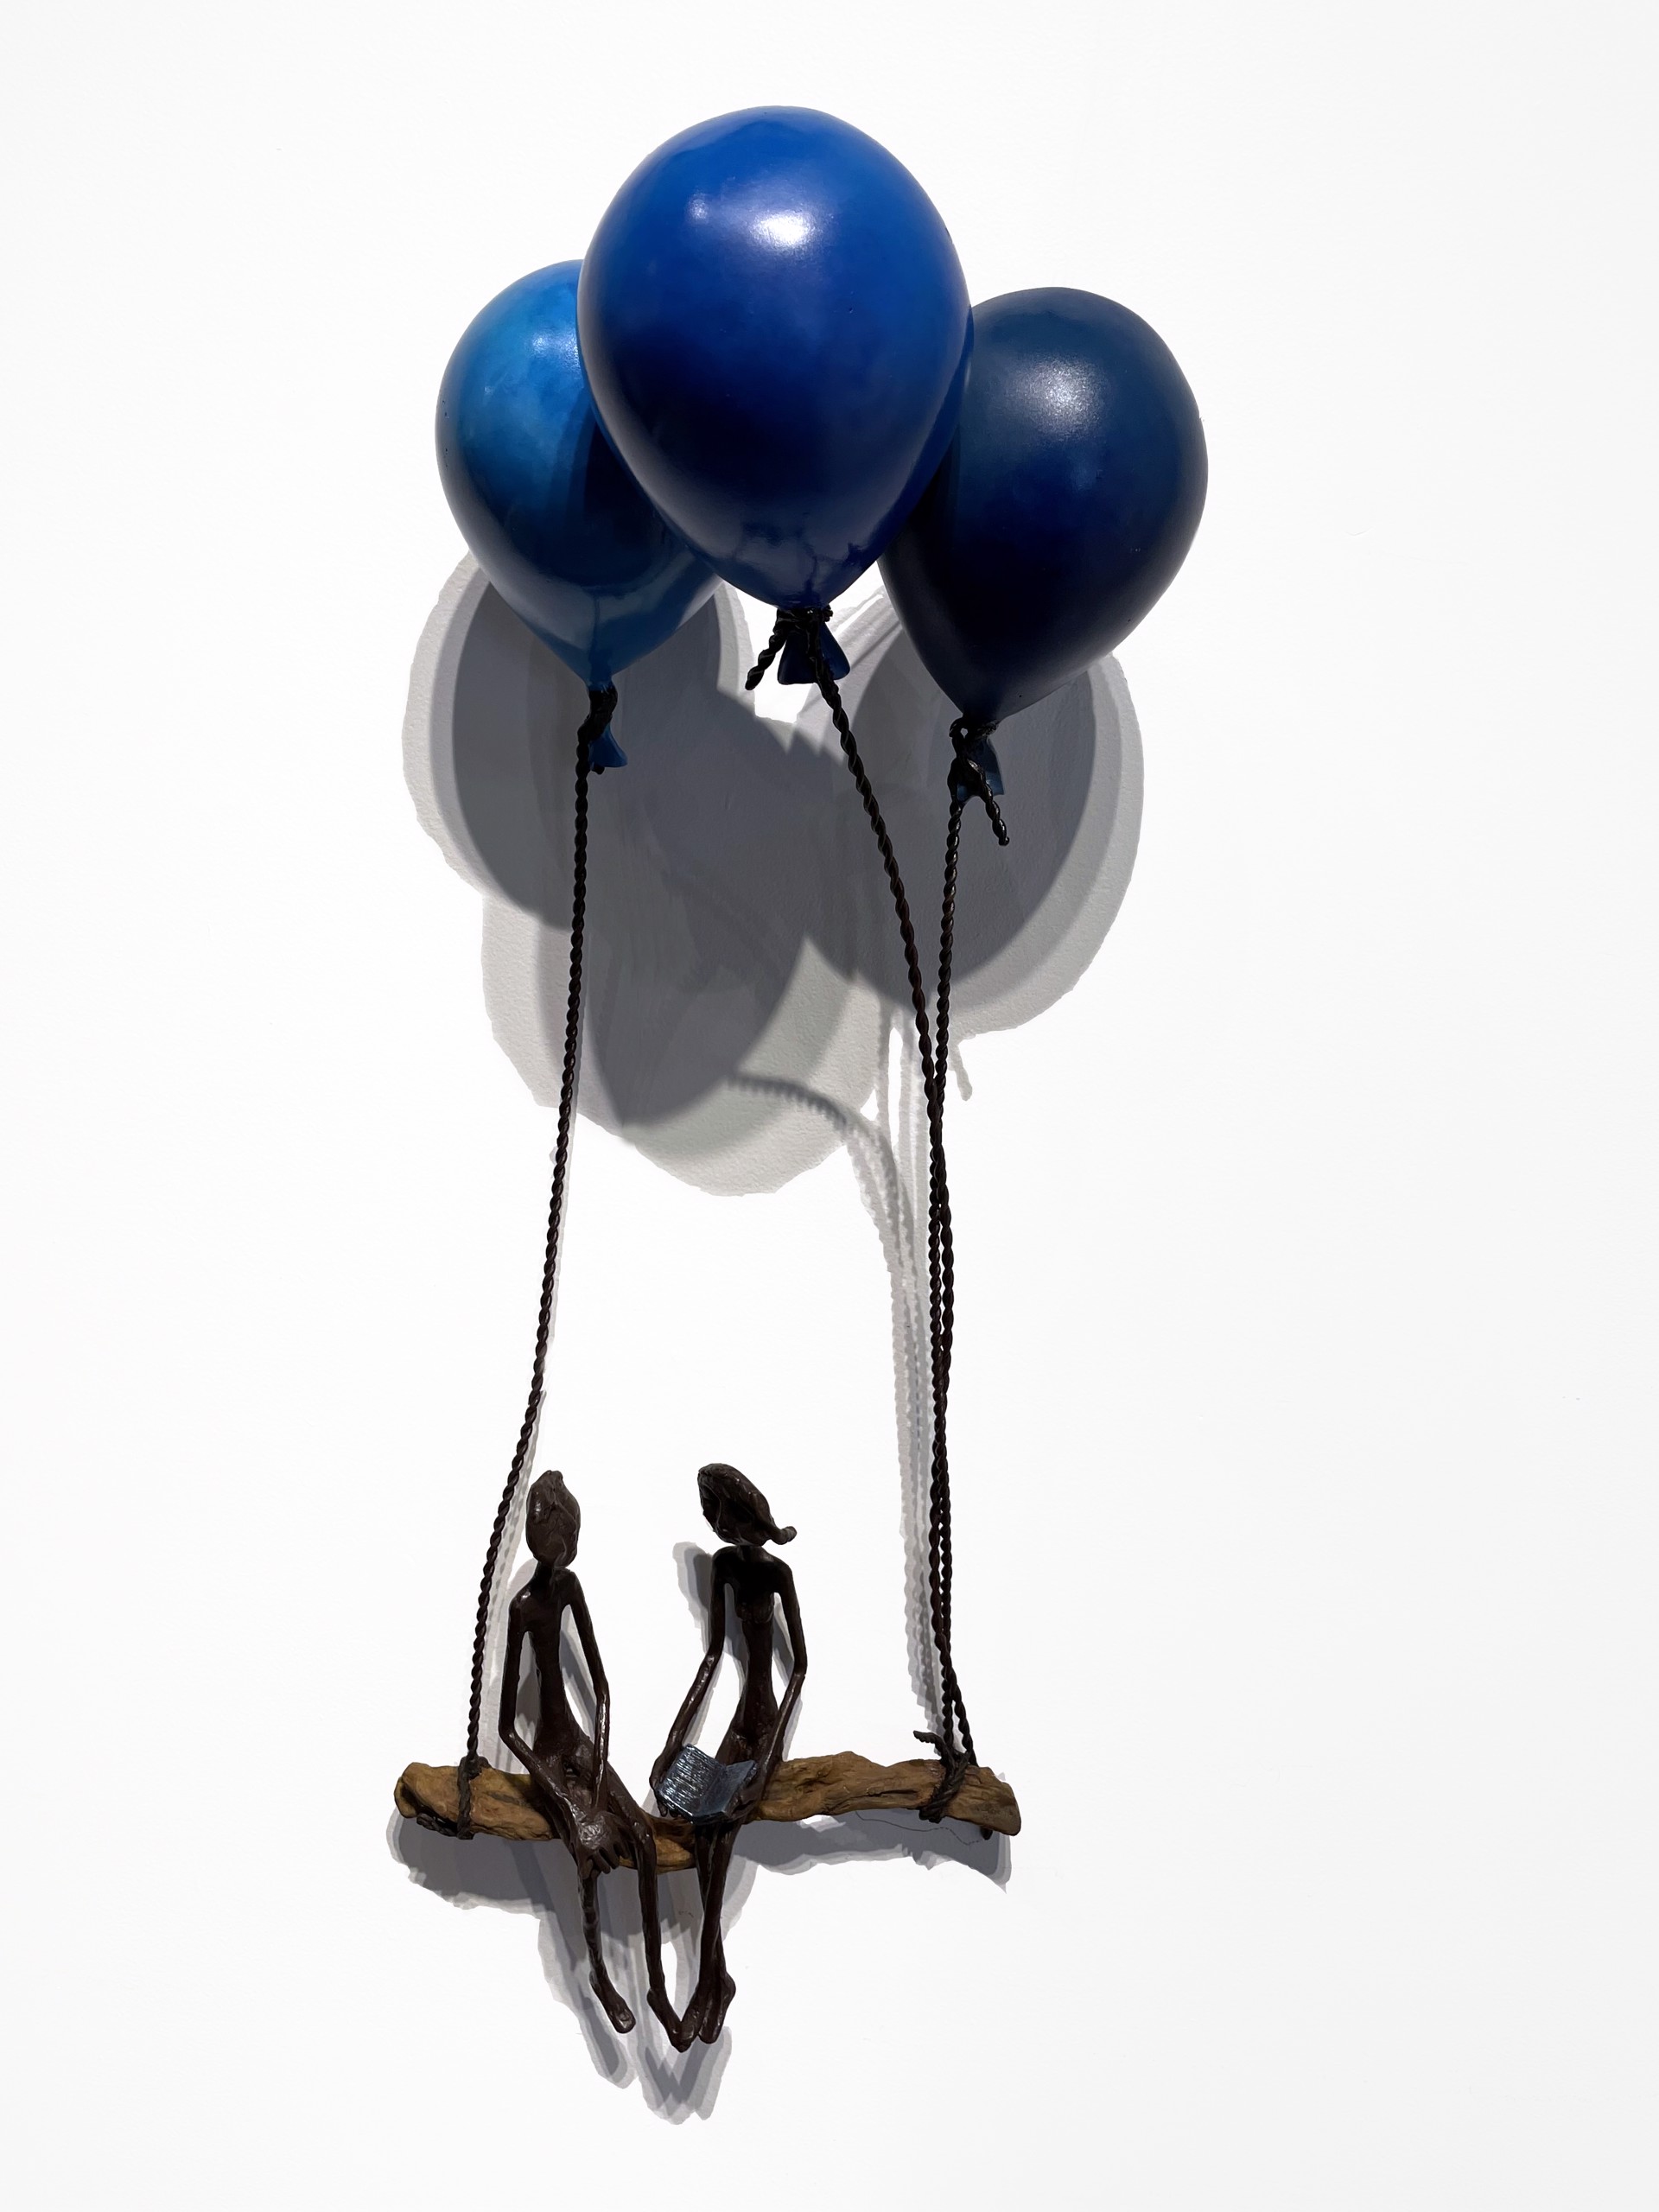 Three Small Balloons by Ruth Bloch